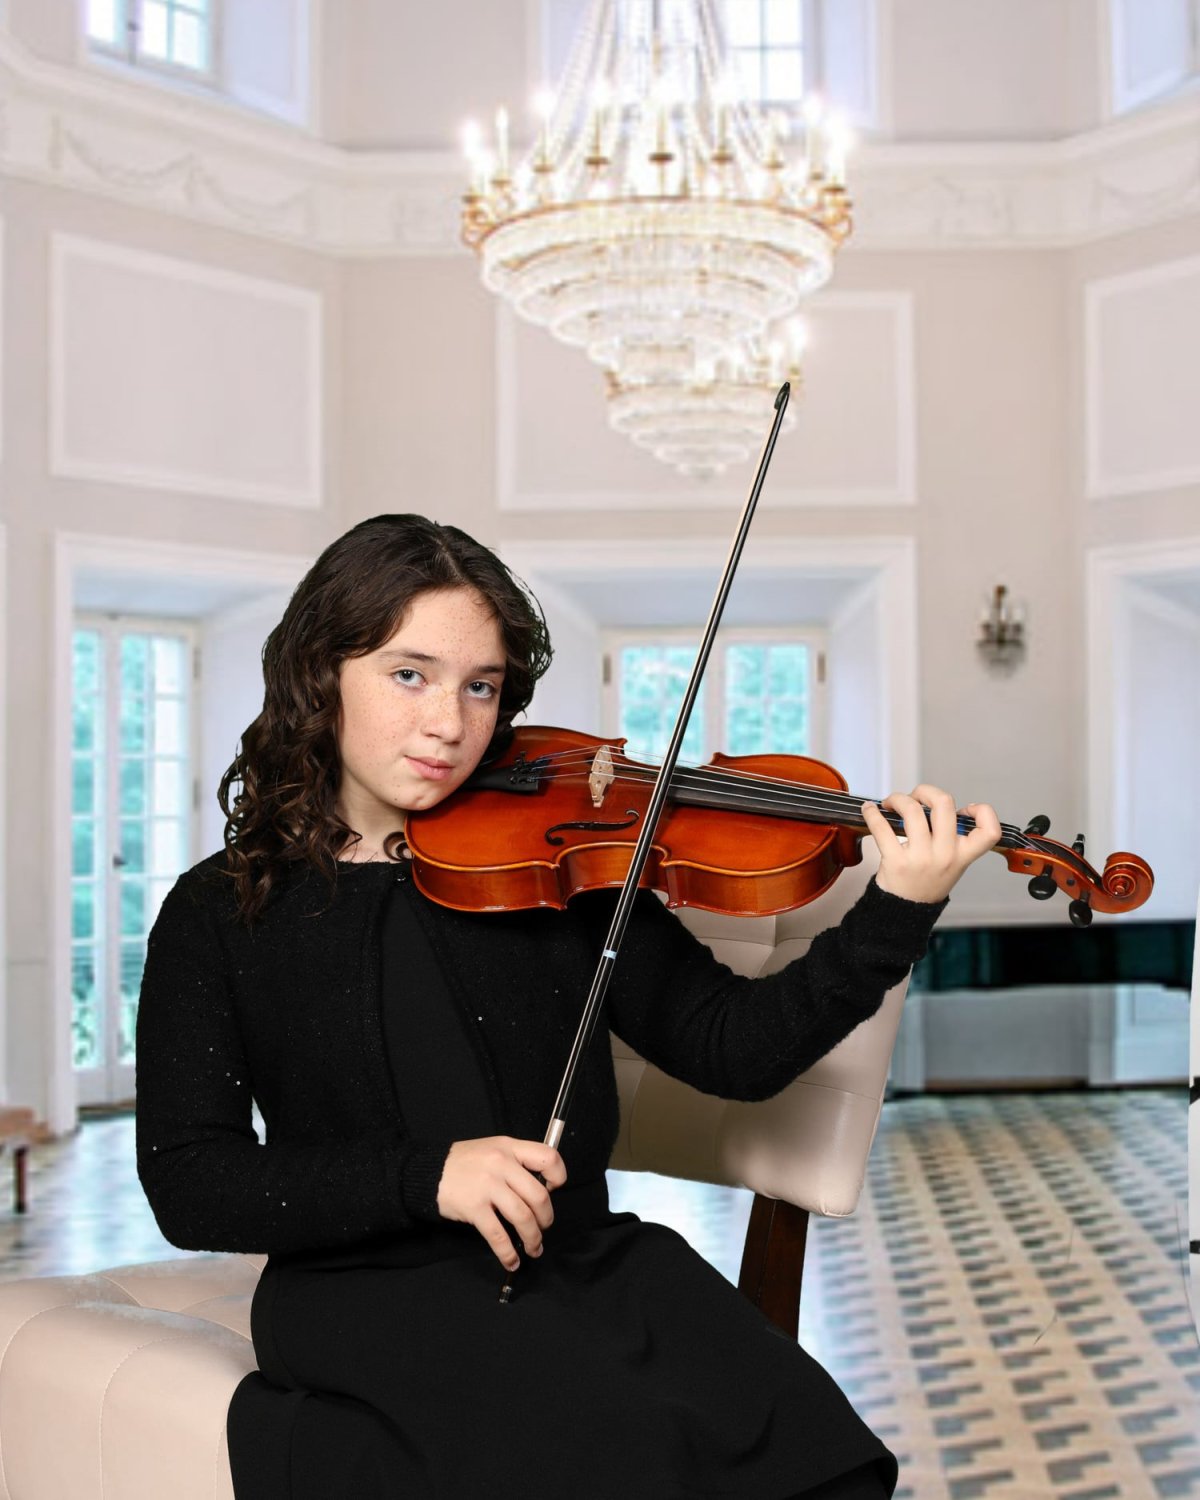 Marysol Boisvert, 12, has booked a spot to play at the prestigious Carnegie Hall next year.